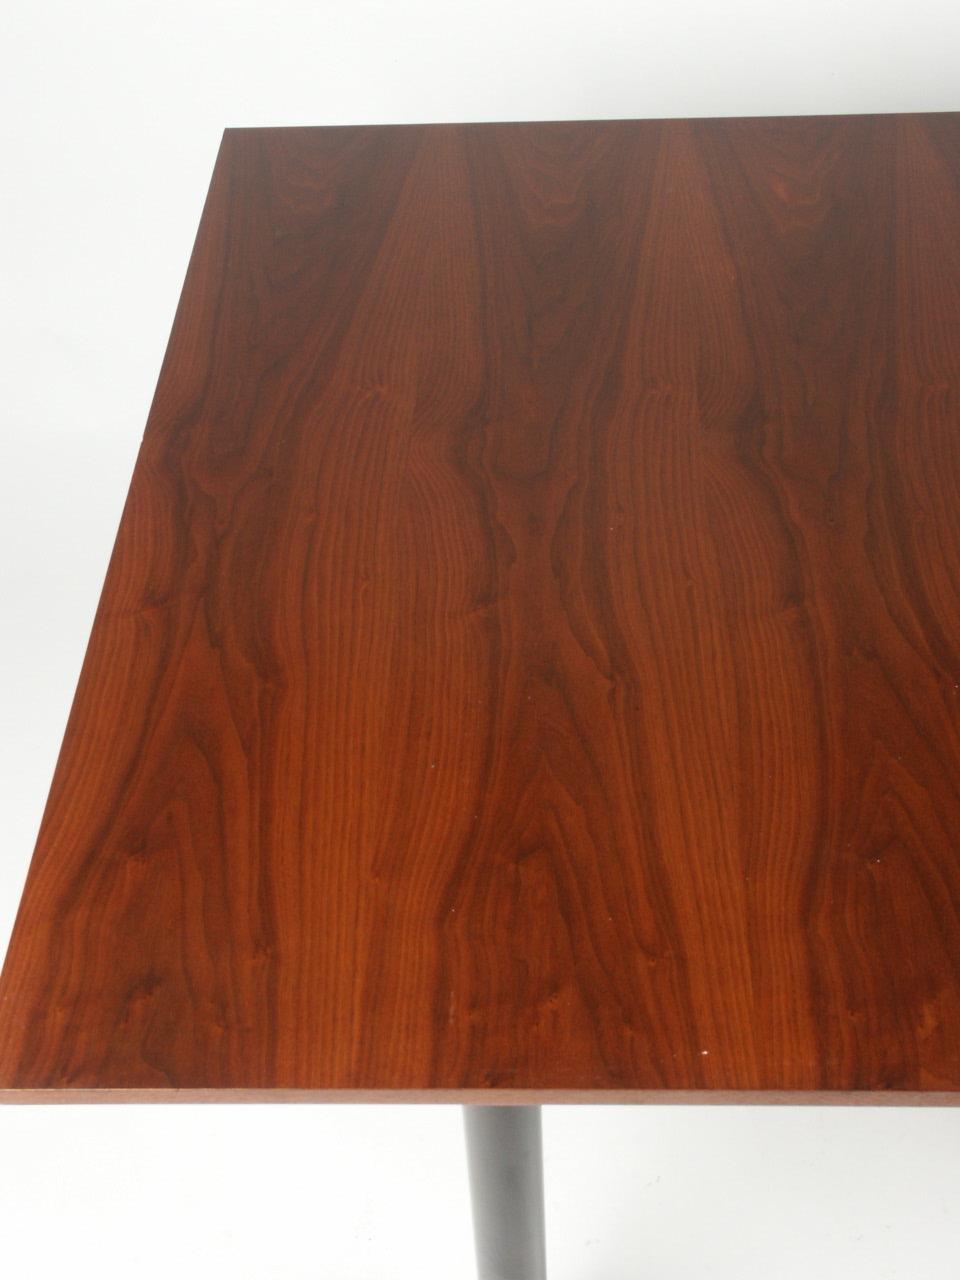  Edward Wormley for Dunbar 1950s Asian Influence Walnut Extension Dining Table In Good Condition For Sale In St. Louis, MO